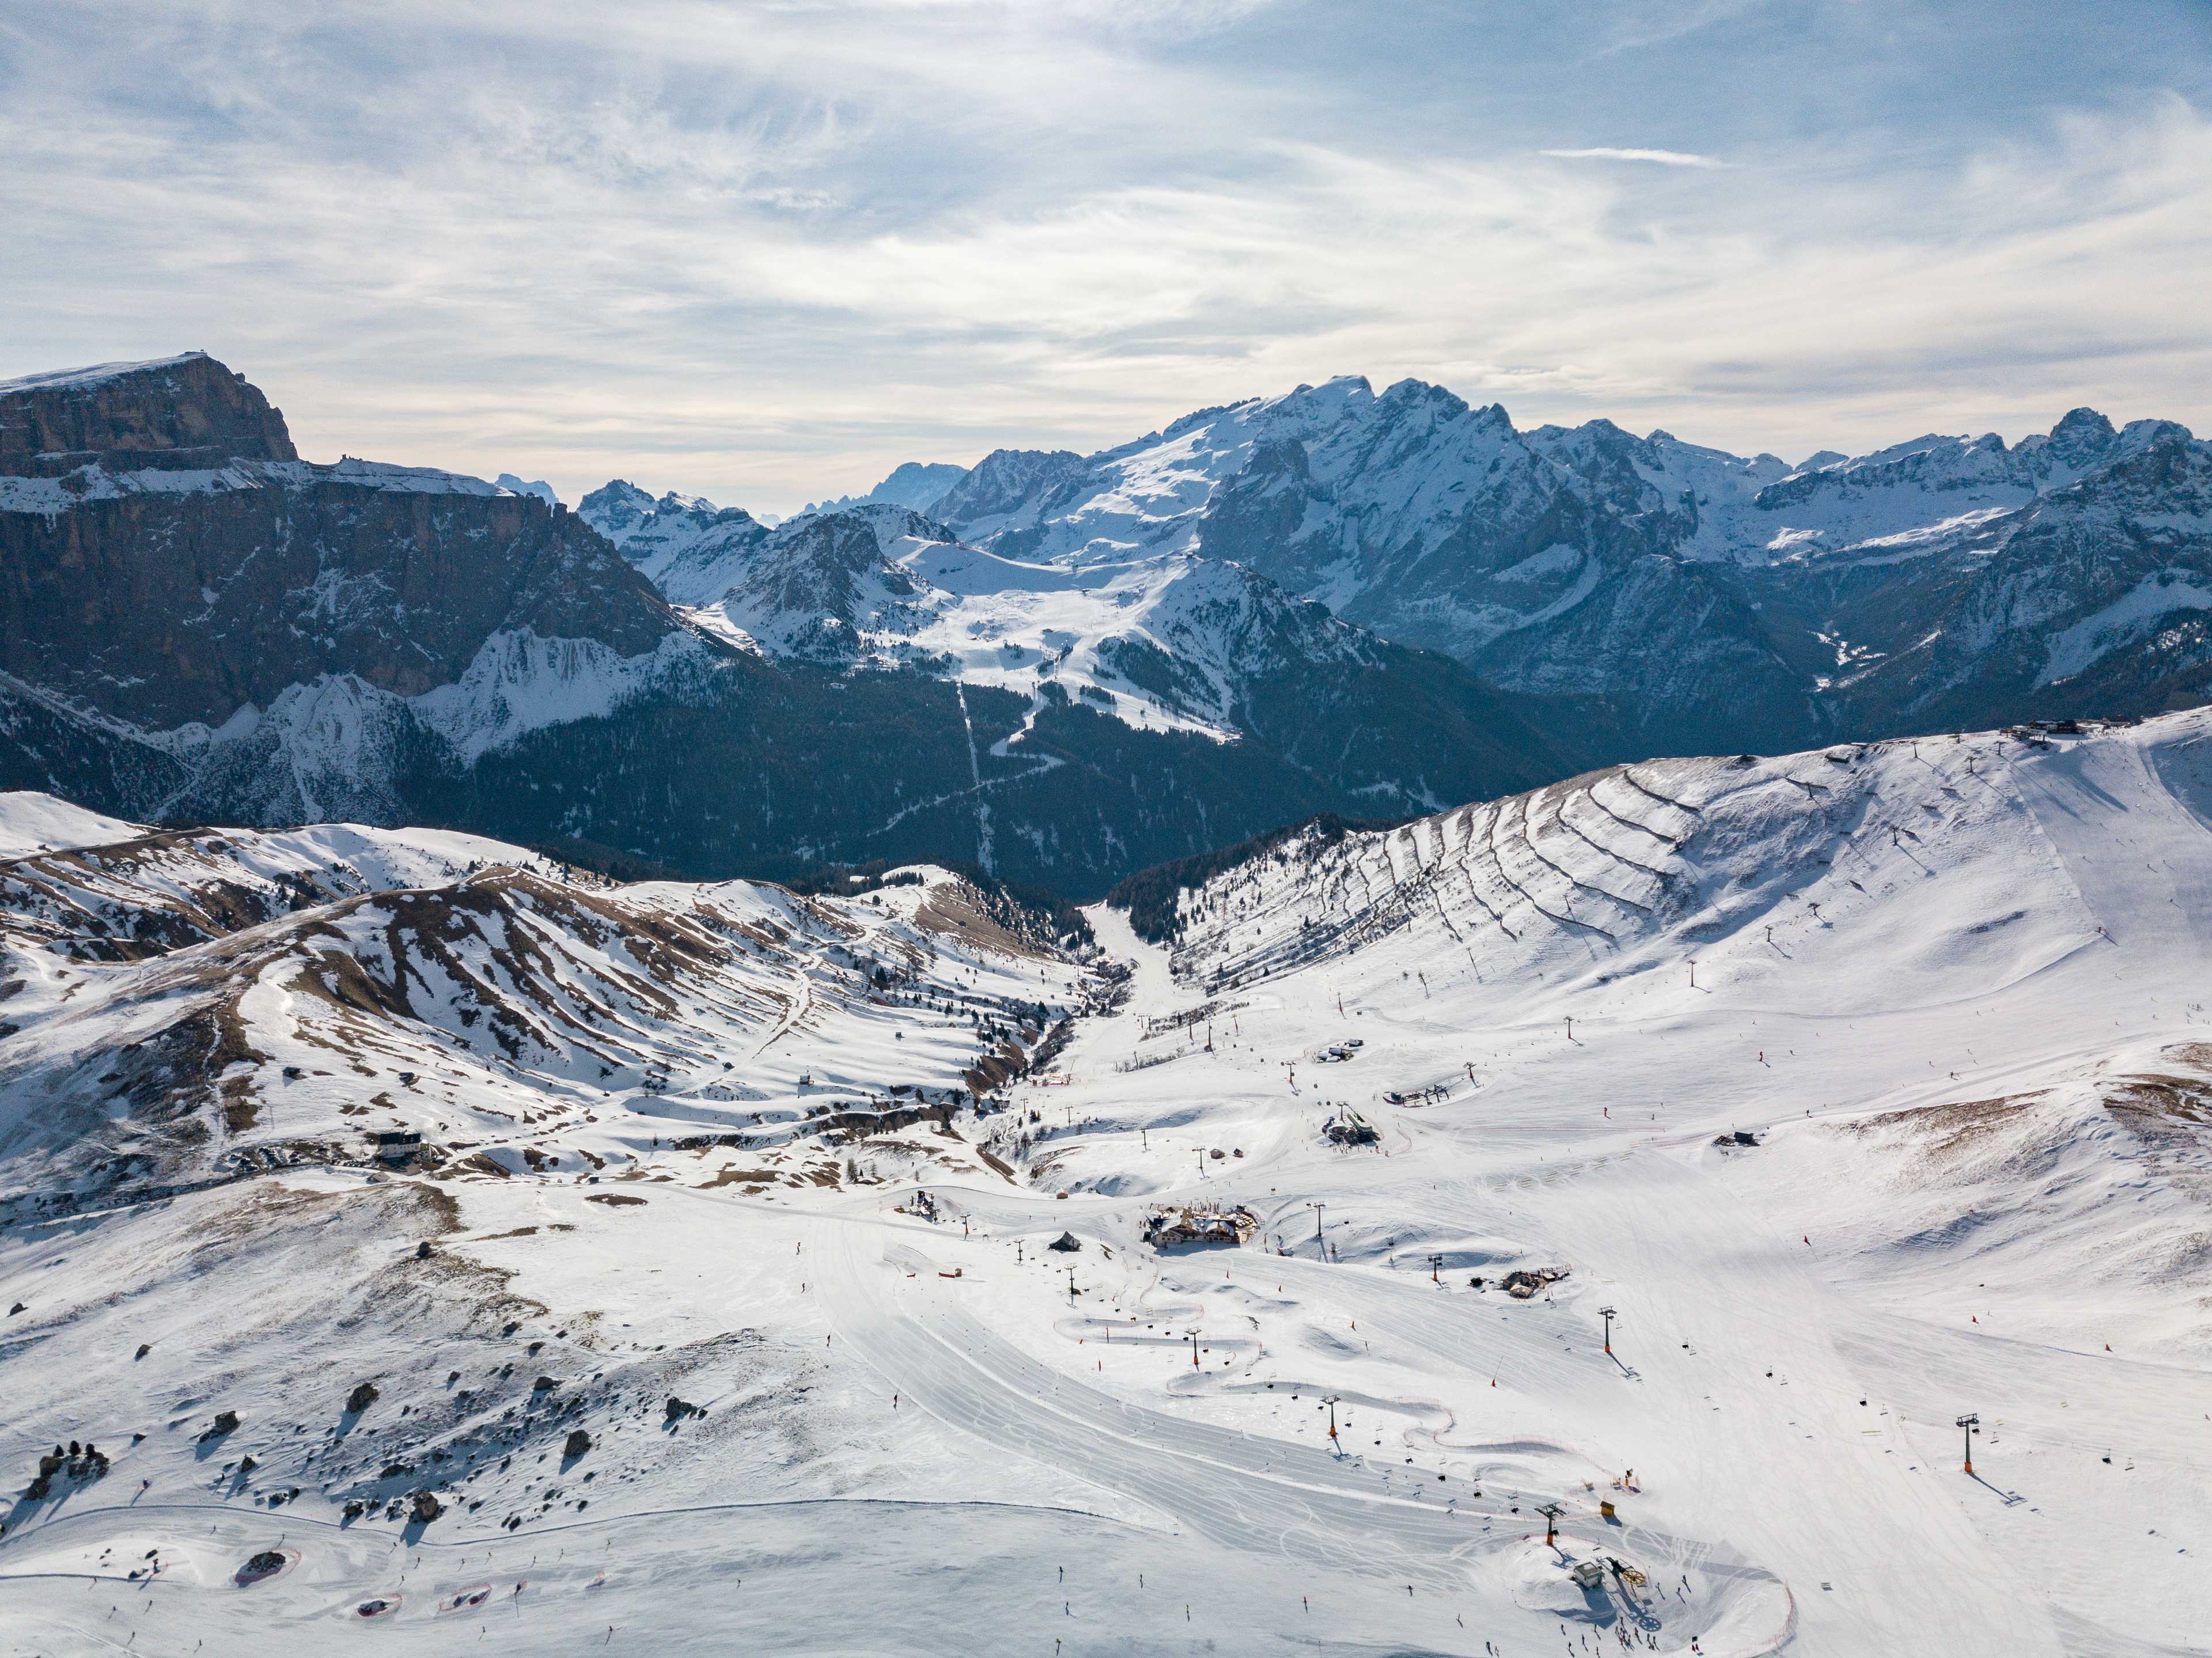 Slopes down to Pian Frataces and Belvedere in the background, Val di Fassa